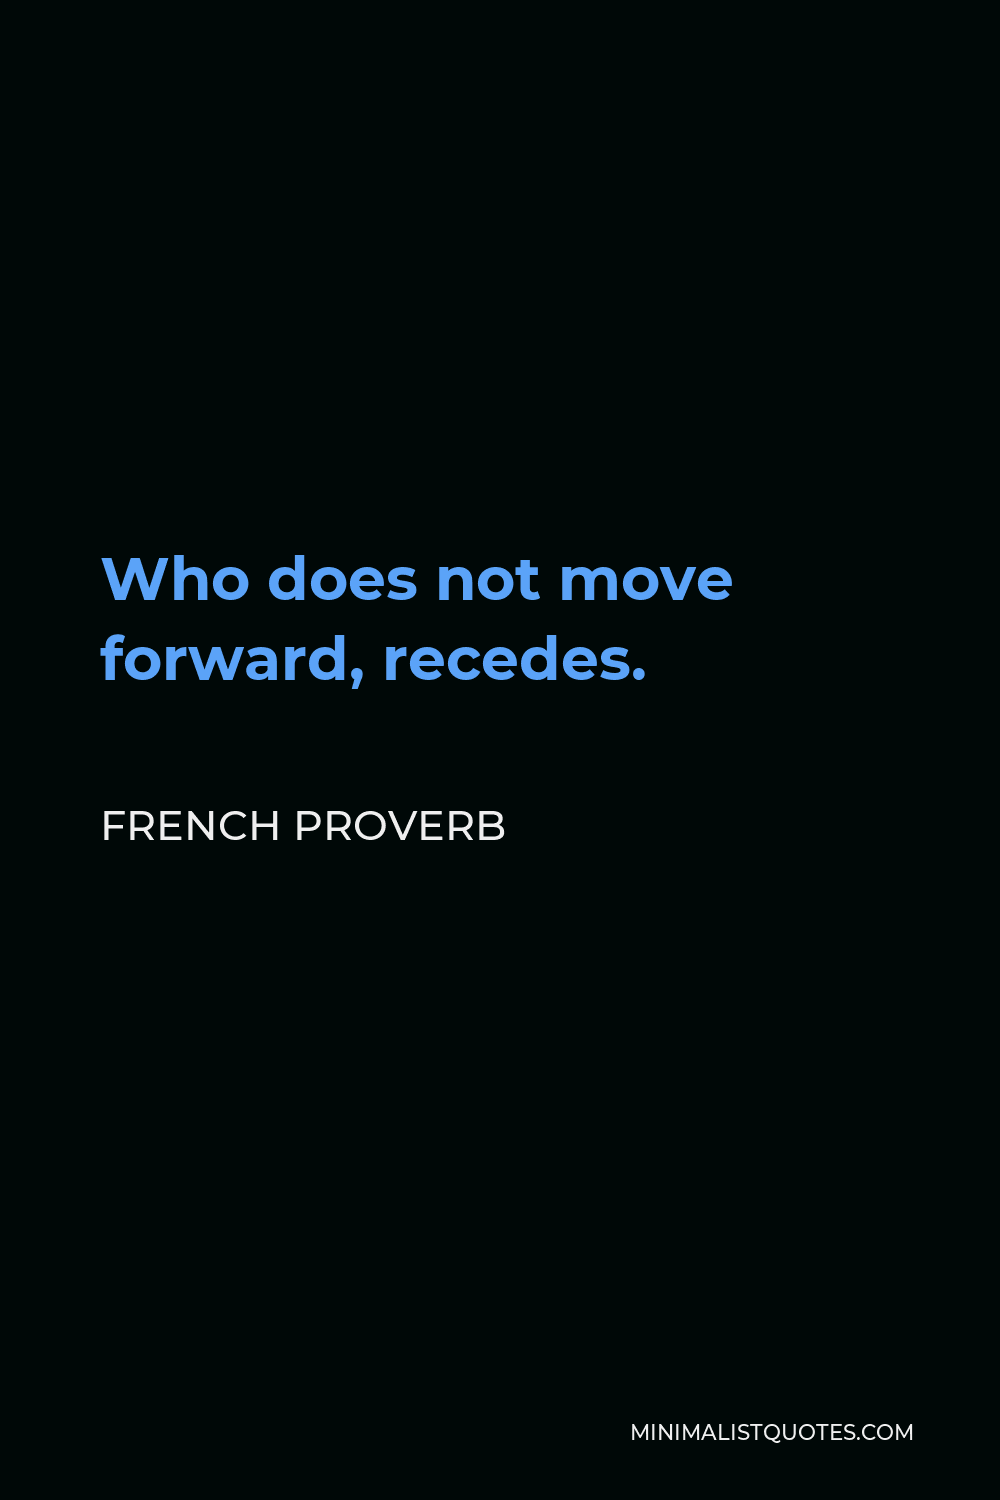 French Proverb Quote - Who does not move forward, recedes.